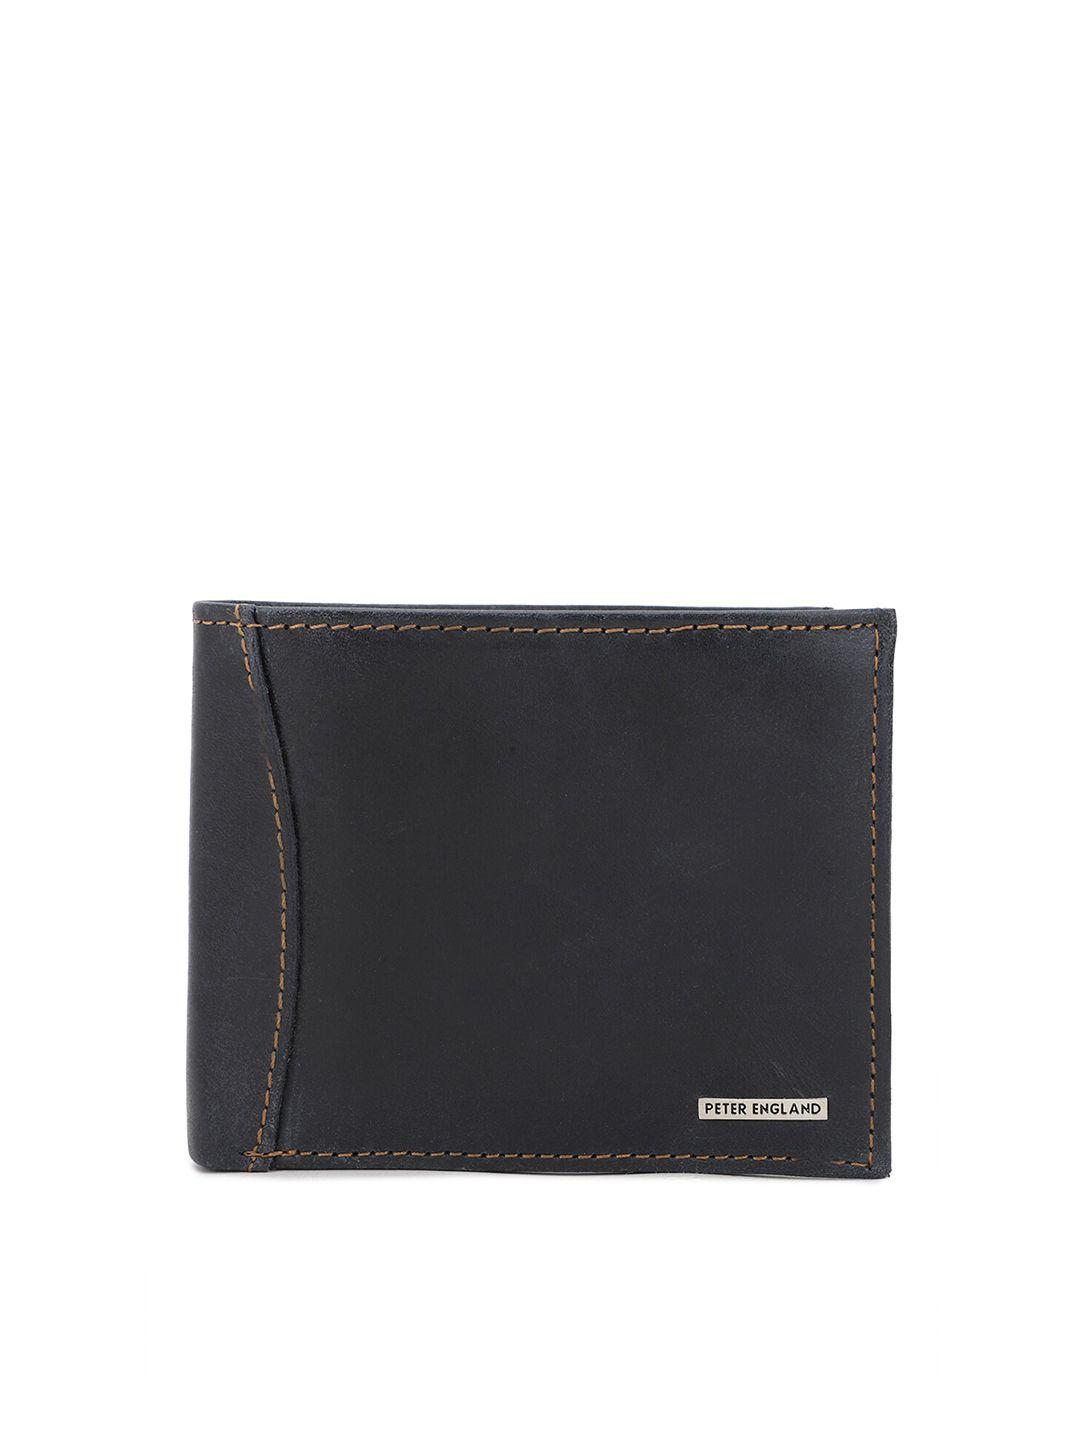 peter-england-men-black-leather-two-fold-wallet